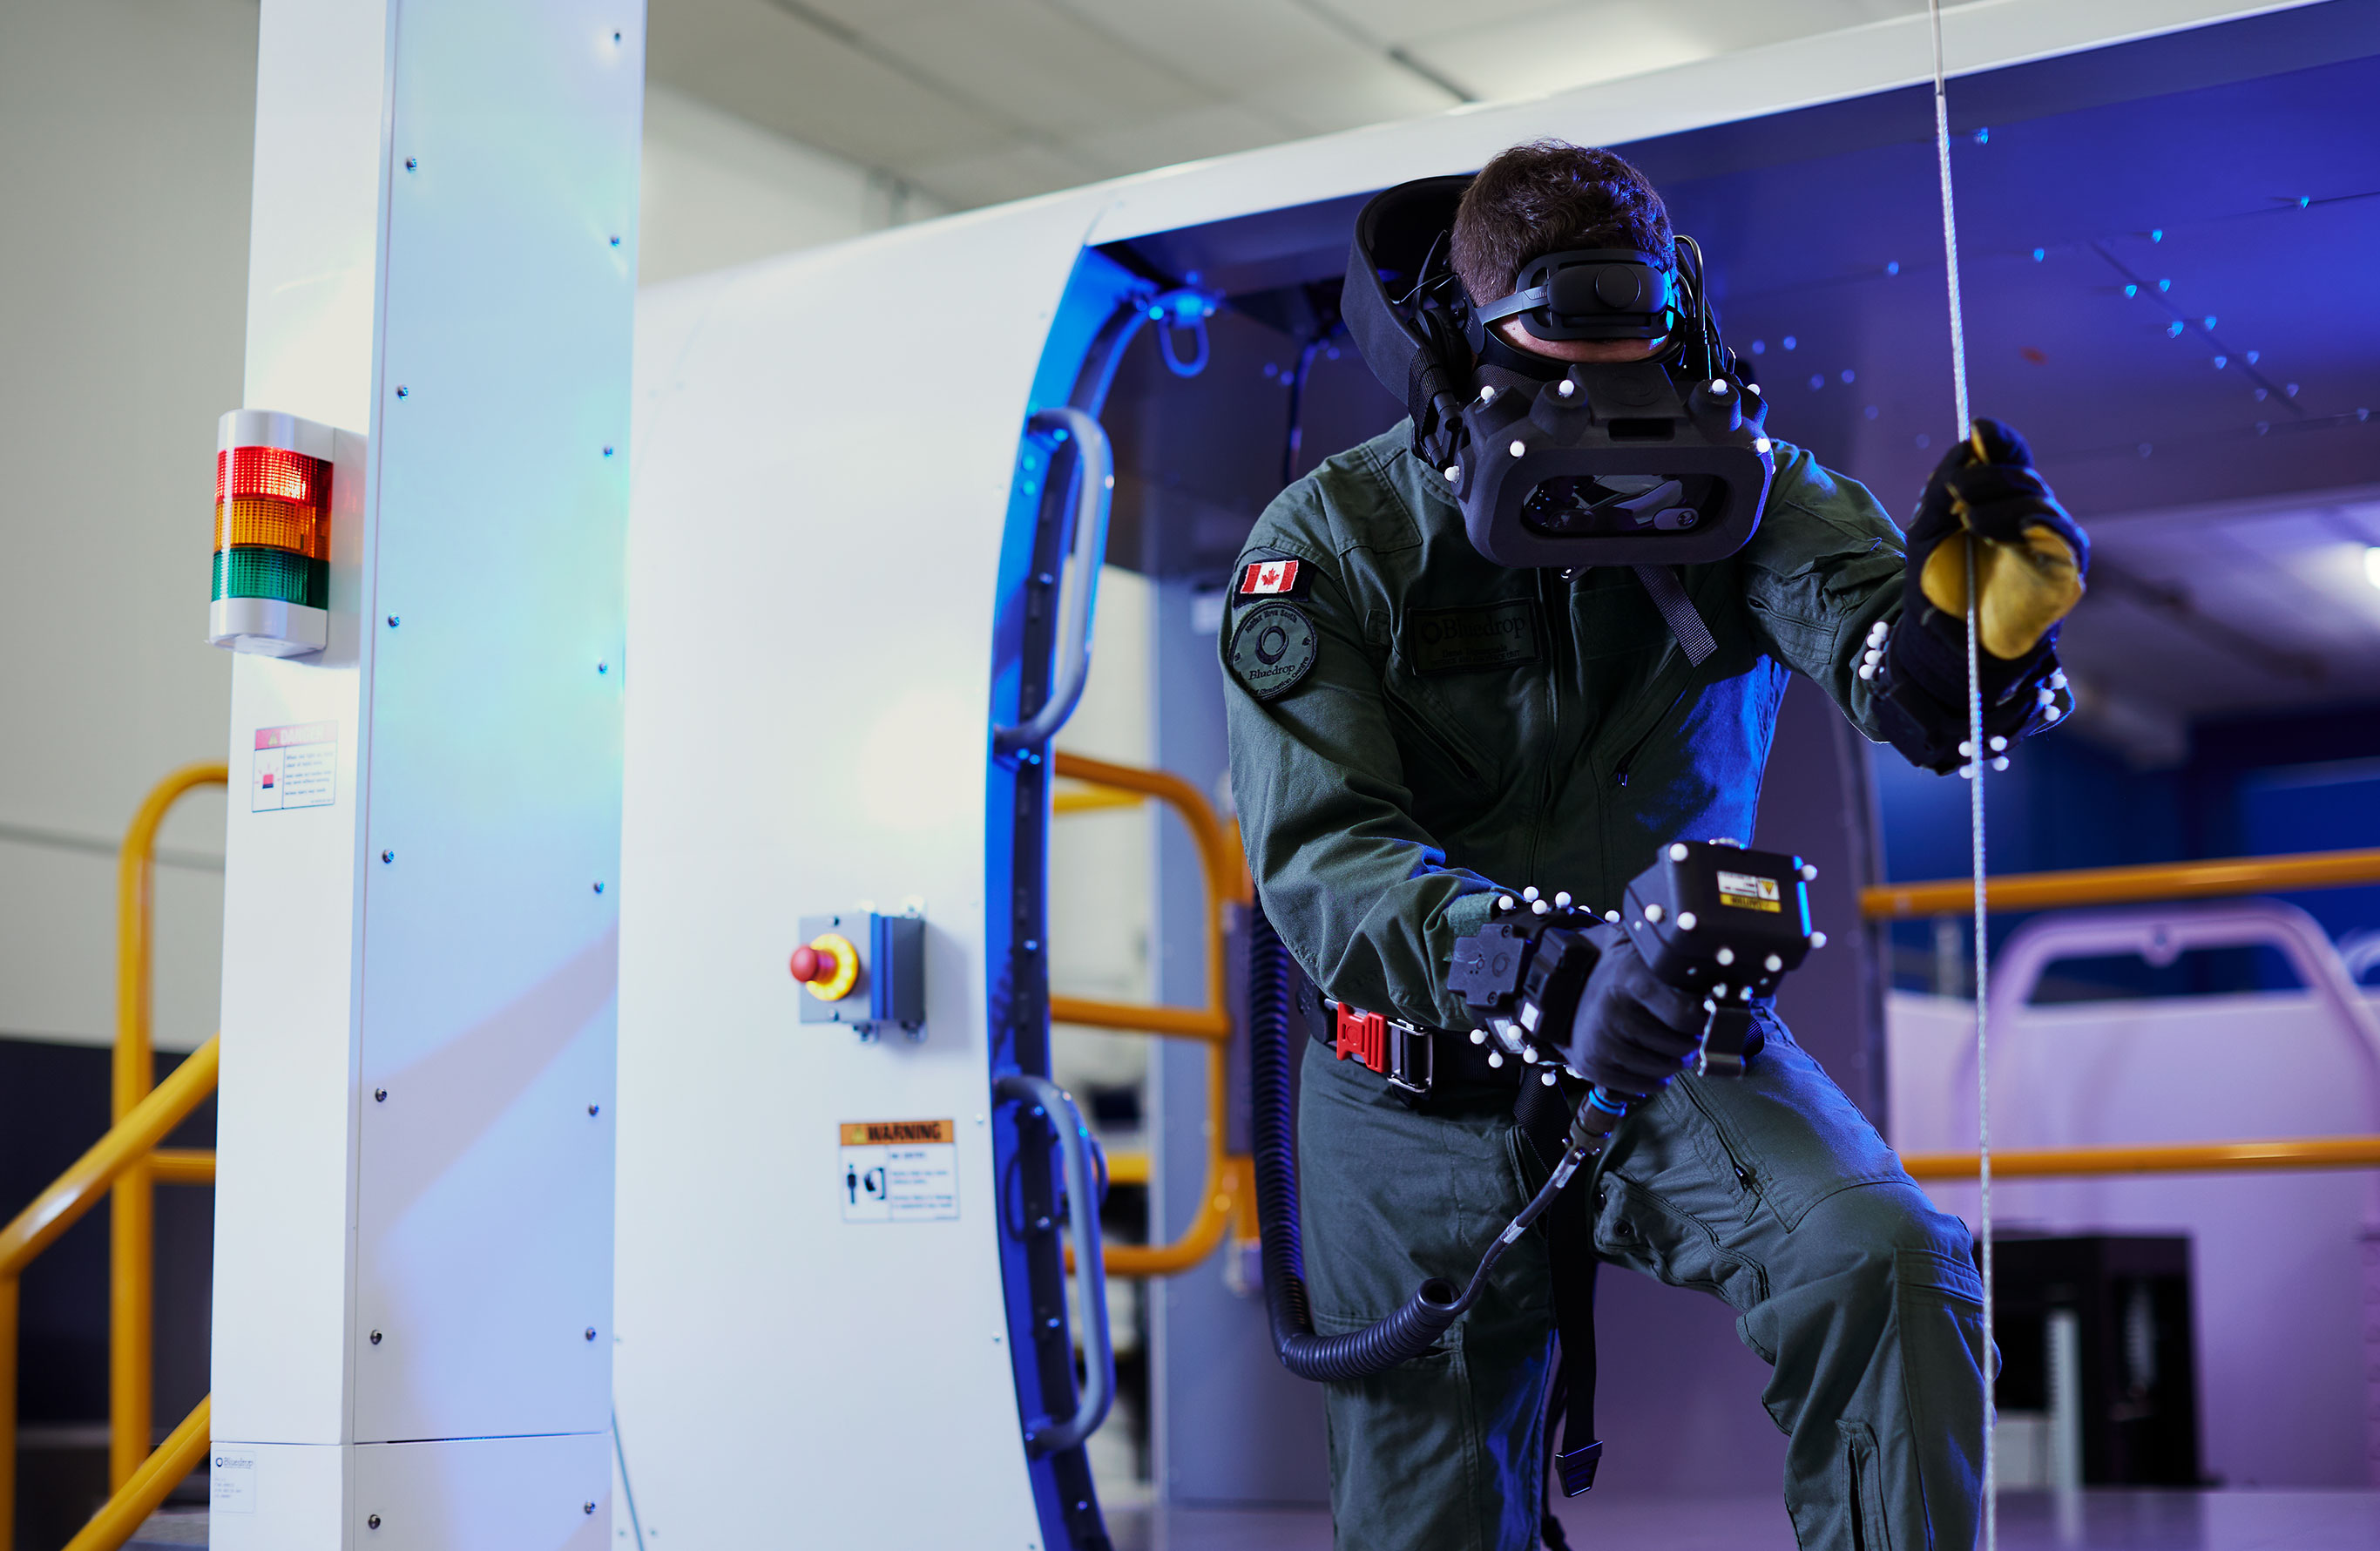 Header Image. Man wearing VR headset holding a device and cable